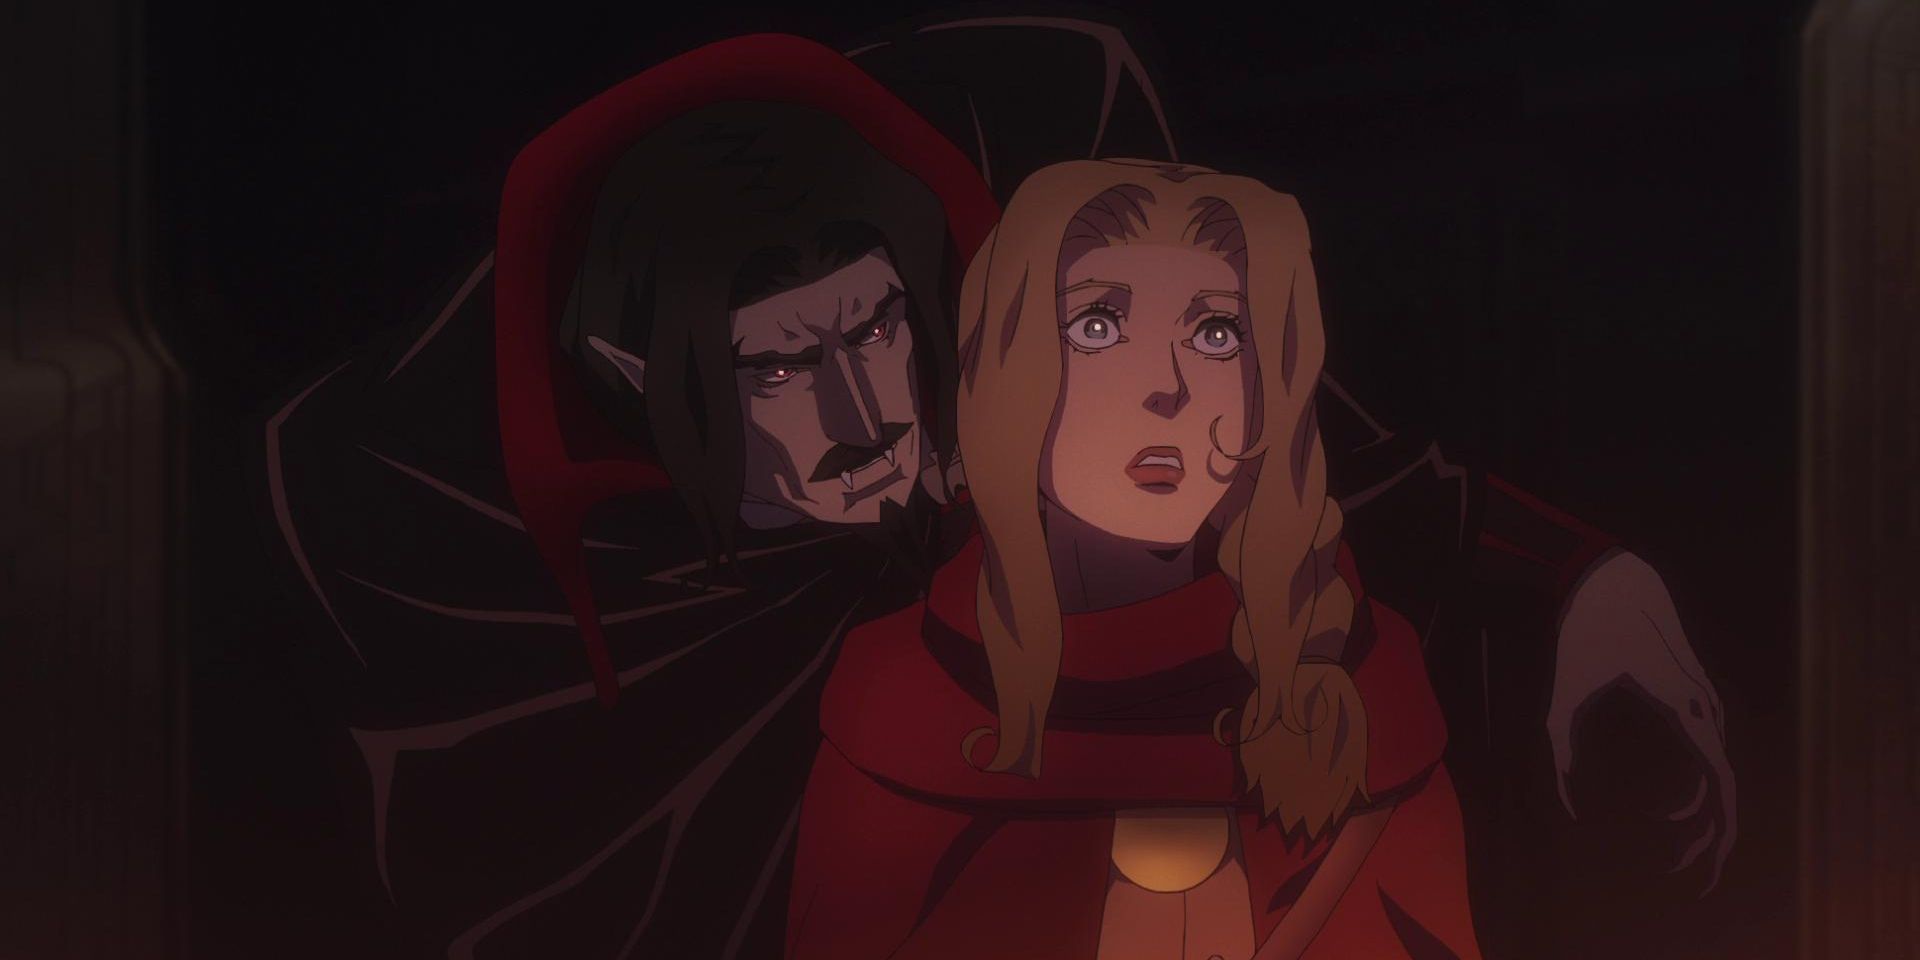 Dracula, voiced by Graham McTavish, leaning out of the shadows behind Lisa's shoulder, voiced by Emily Swallow, in Castlevania